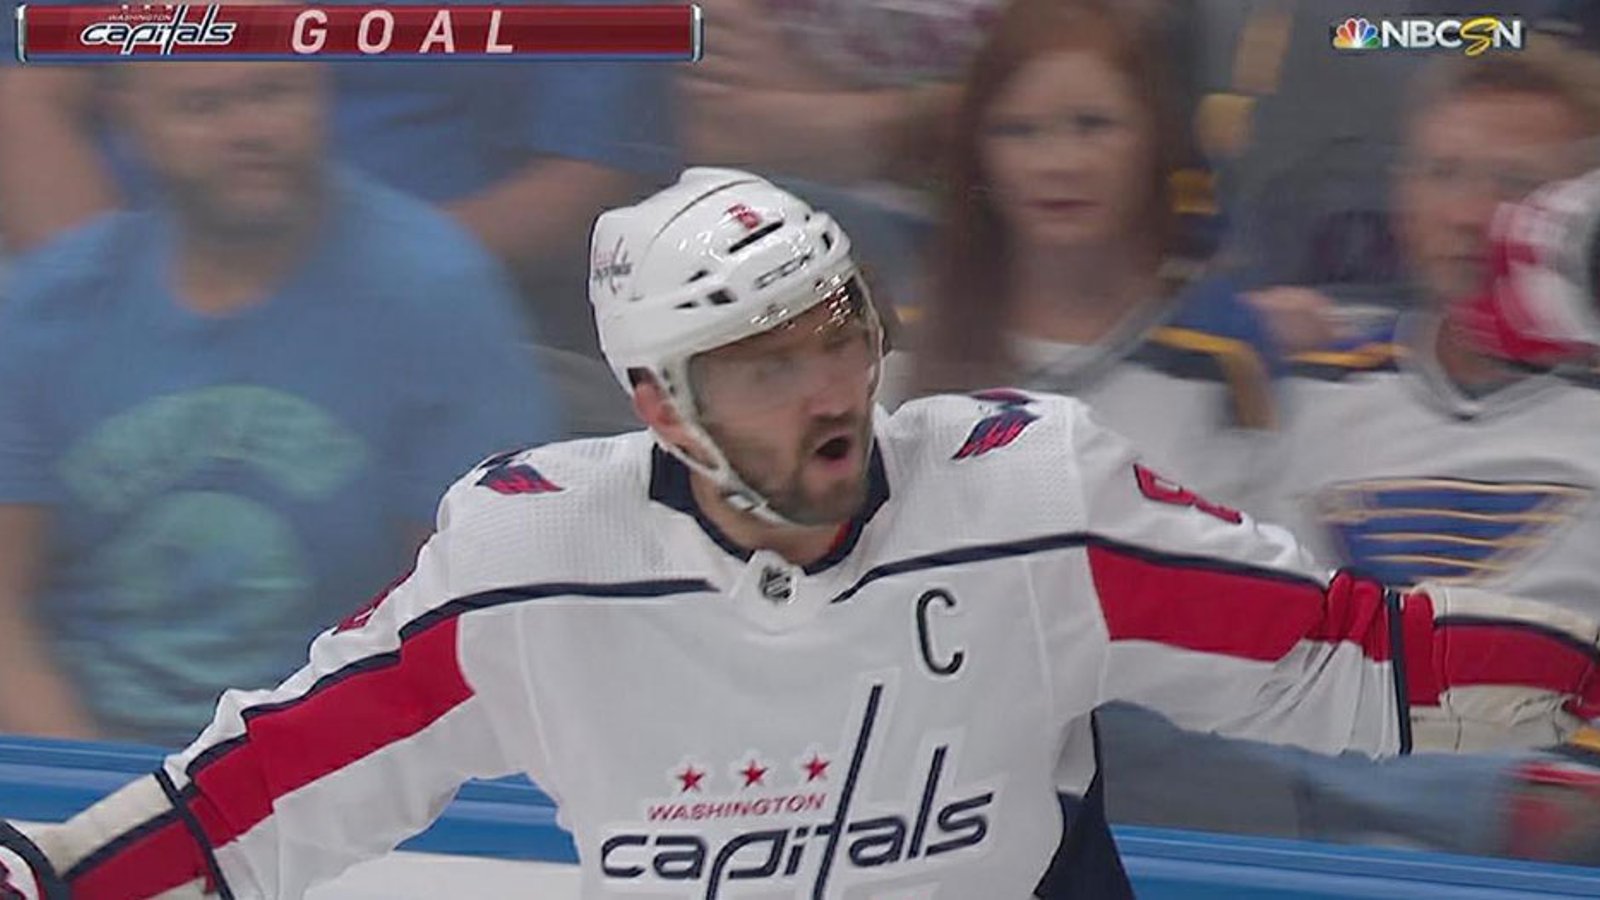 Ovechkin scores his first of the season with a remarkable effort